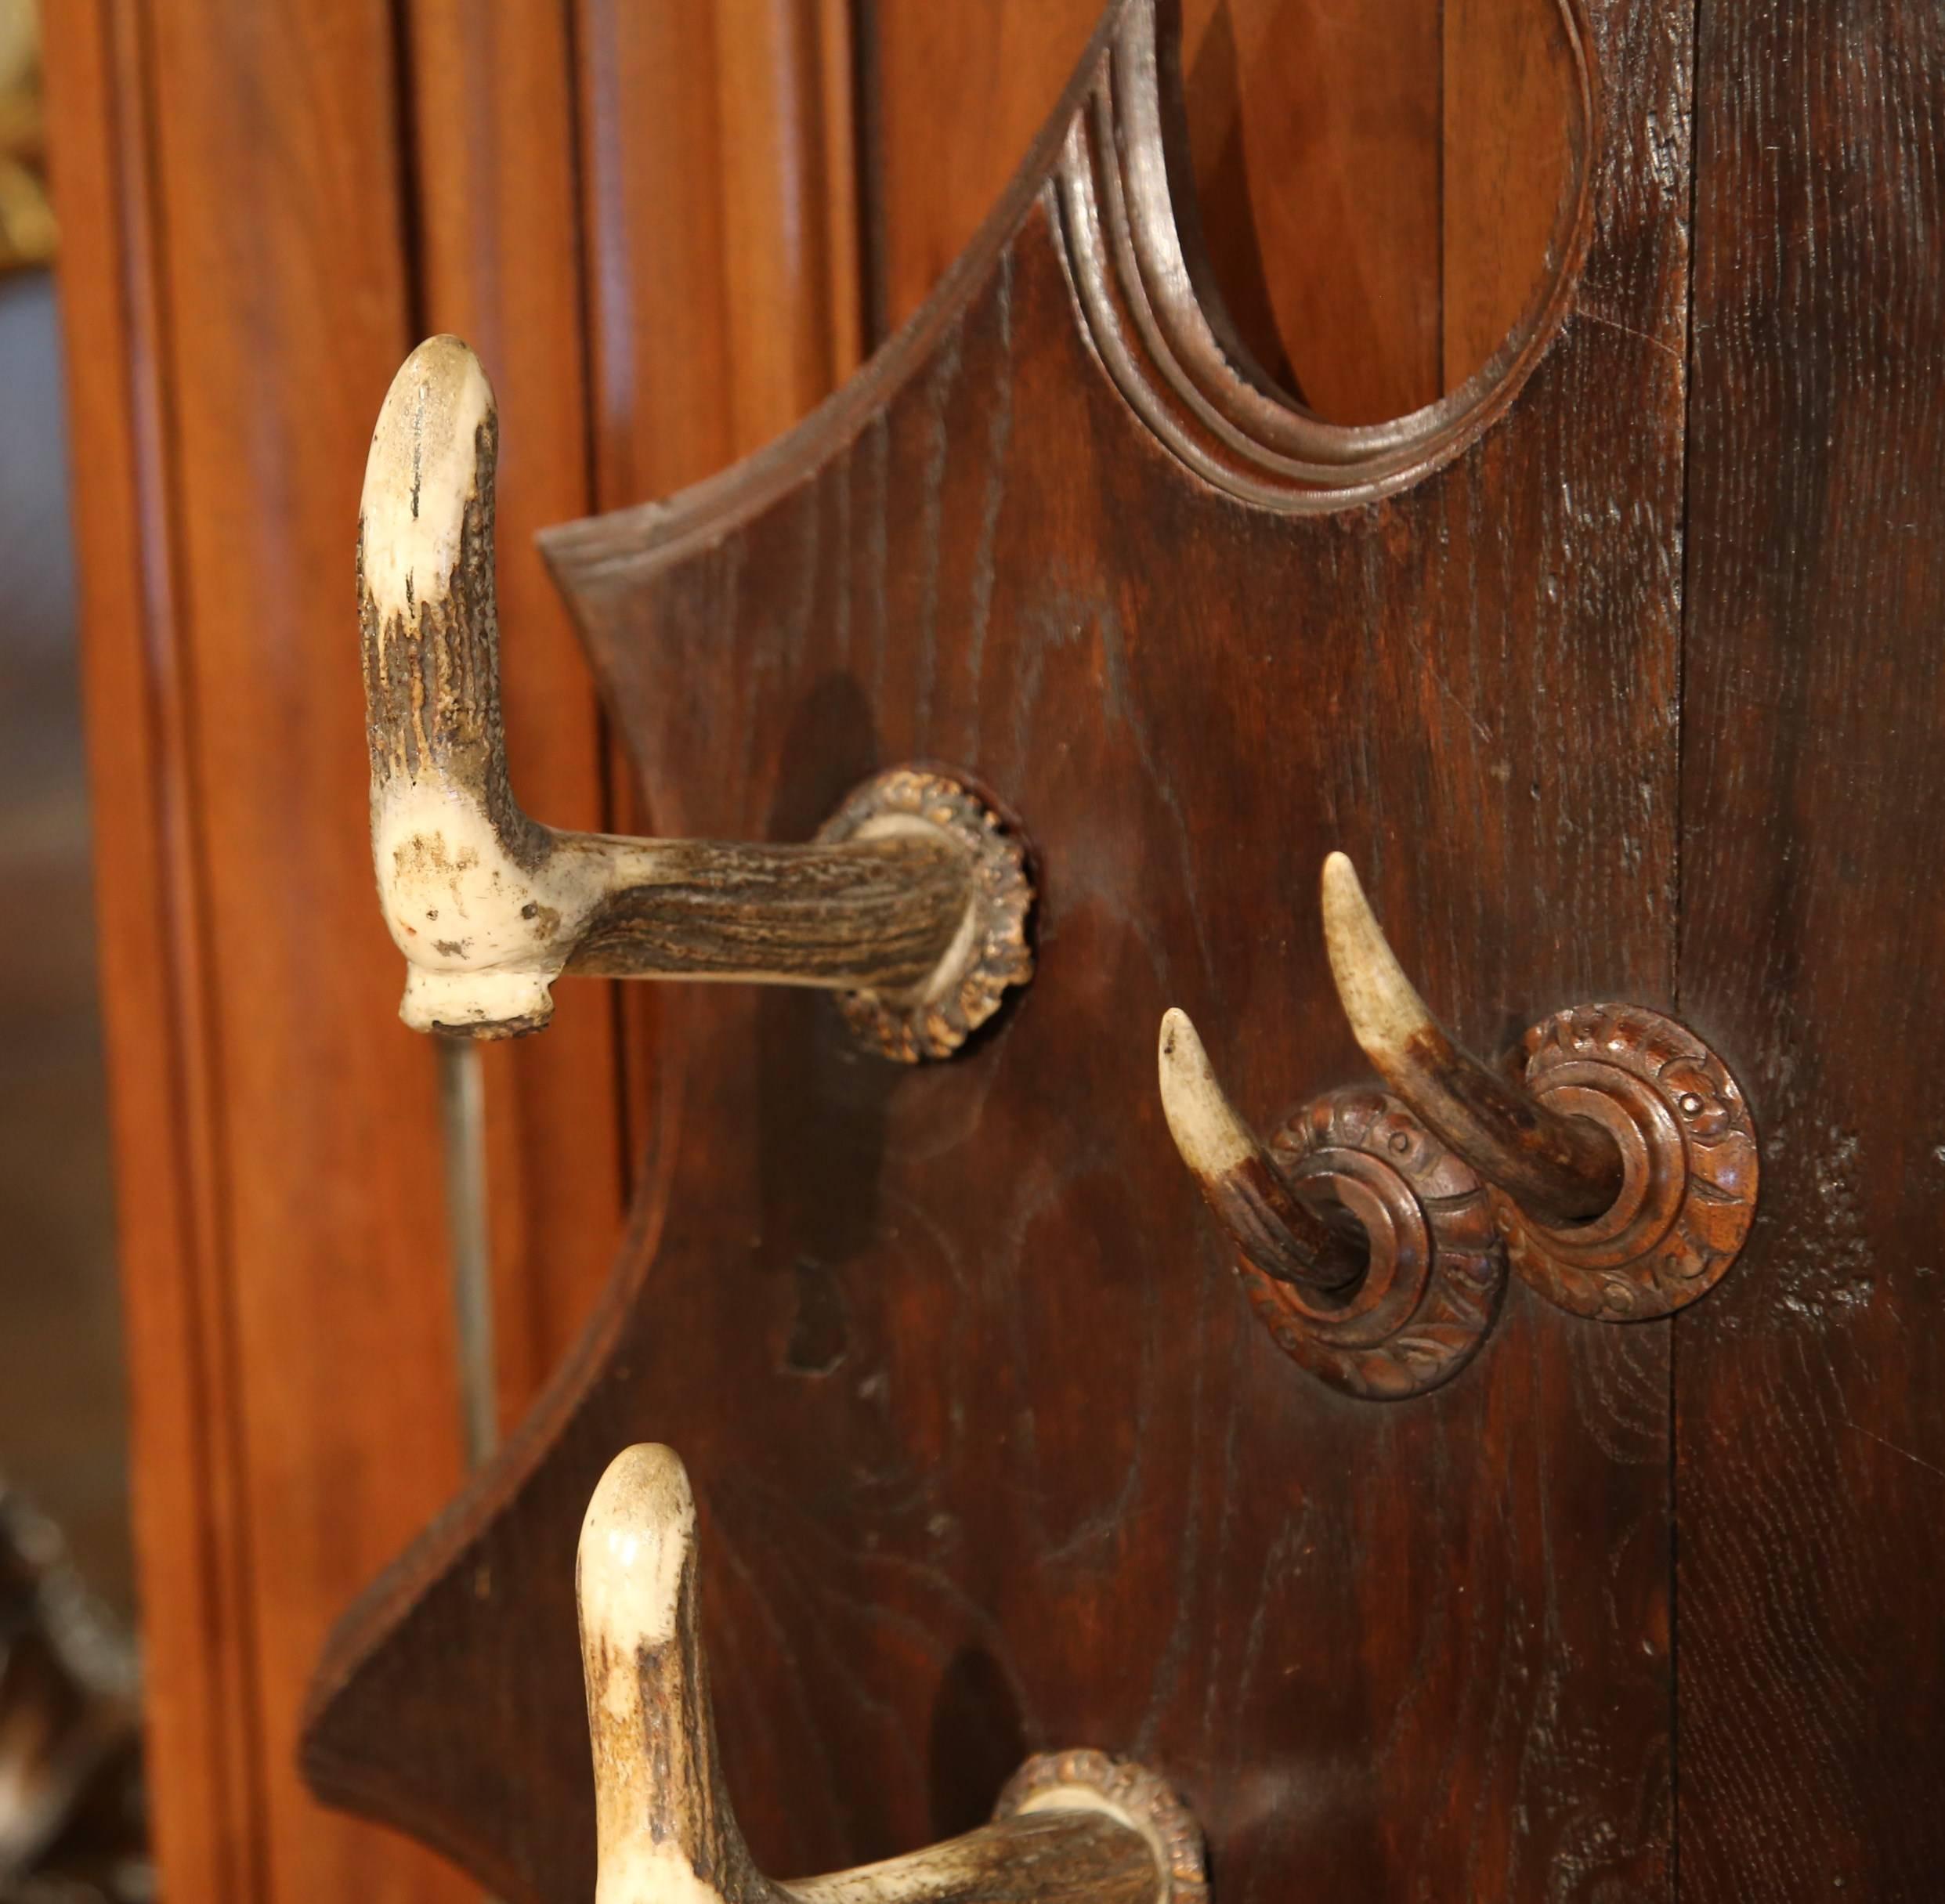 19th Century French Black Forest Carved Gun or Coat Rack with Antlers and Horns 3